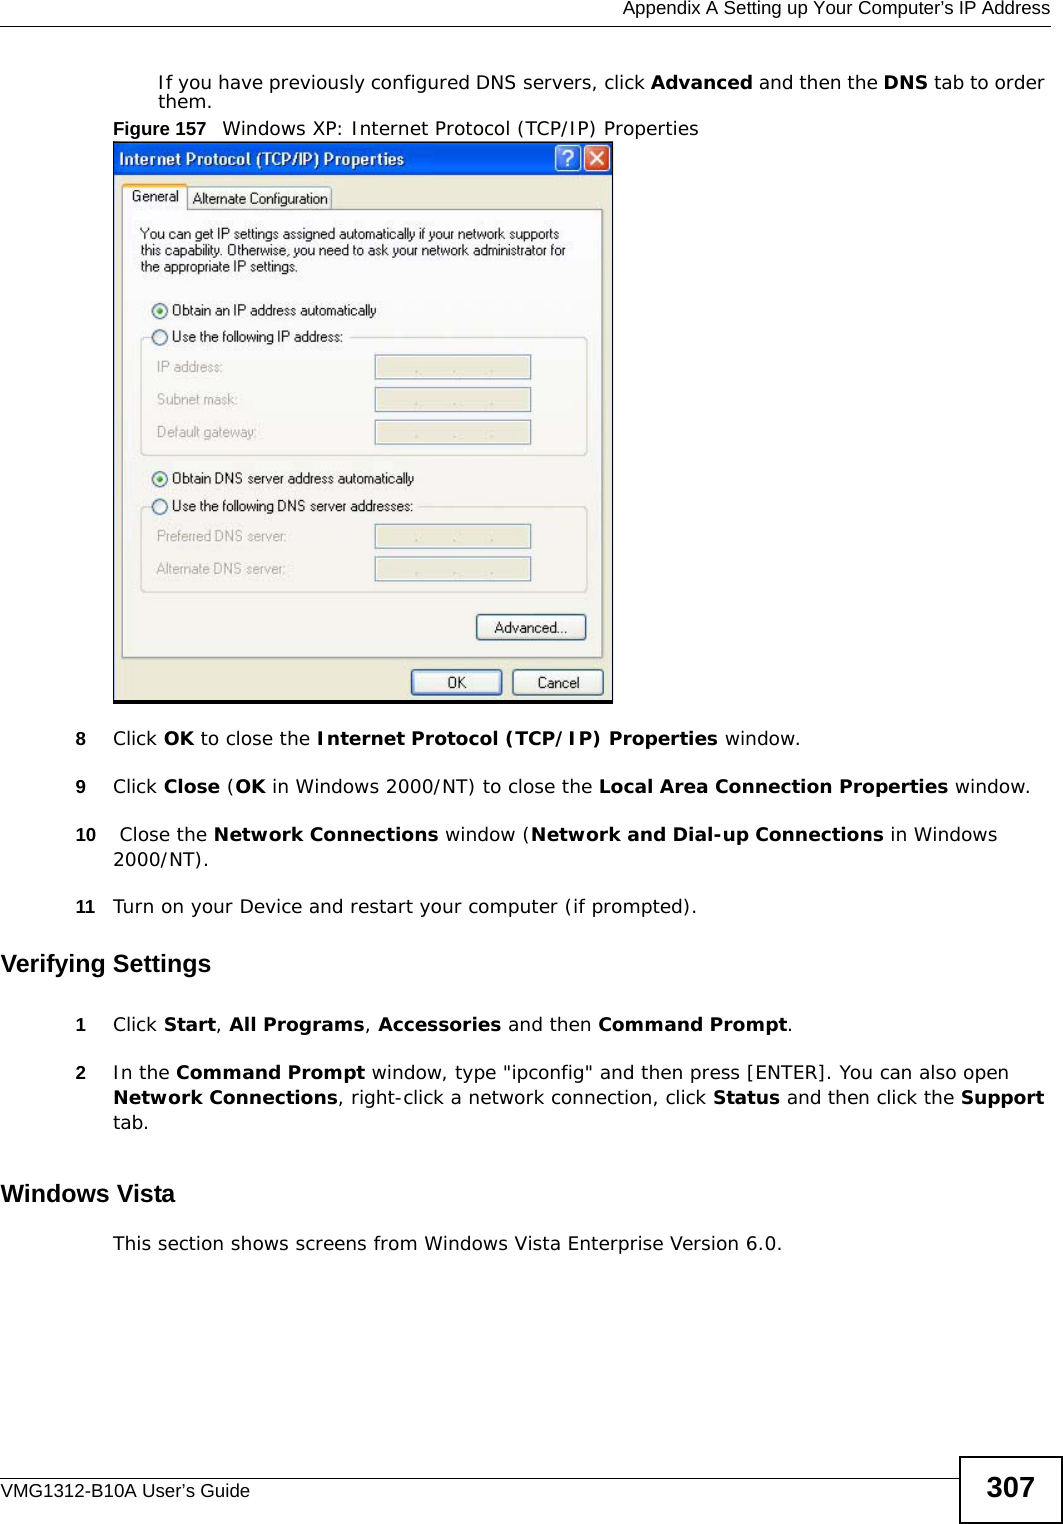  Appendix A Setting up Your Computer’s IP AddressVMG1312-B10A User’s Guide 307If you have previously configured DNS servers, click Advanced and then the DNS tab to order them.Figure 157   Windows XP: Internet Protocol (TCP/IP) Properties8Click OK to close the Internet Protocol (TCP/IP) Properties window.9Click Close (OK in Windows 2000/NT) to close the Local Area Connection Properties window.10  Close the Network Connections window (Network and Dial-up Connections in Windows 2000/NT).11 Turn on your Device and restart your computer (if prompted).Verifying Settings1Click Start, All Programs, Accessories and then Command Prompt.2In the Command Prompt window, type &quot;ipconfig&quot; and then press [ENTER]. You can also open Network Connections, right-click a network connection, click Status and then click the Support tab.Windows VistaThis section shows screens from Windows Vista Enterprise Version 6.0.